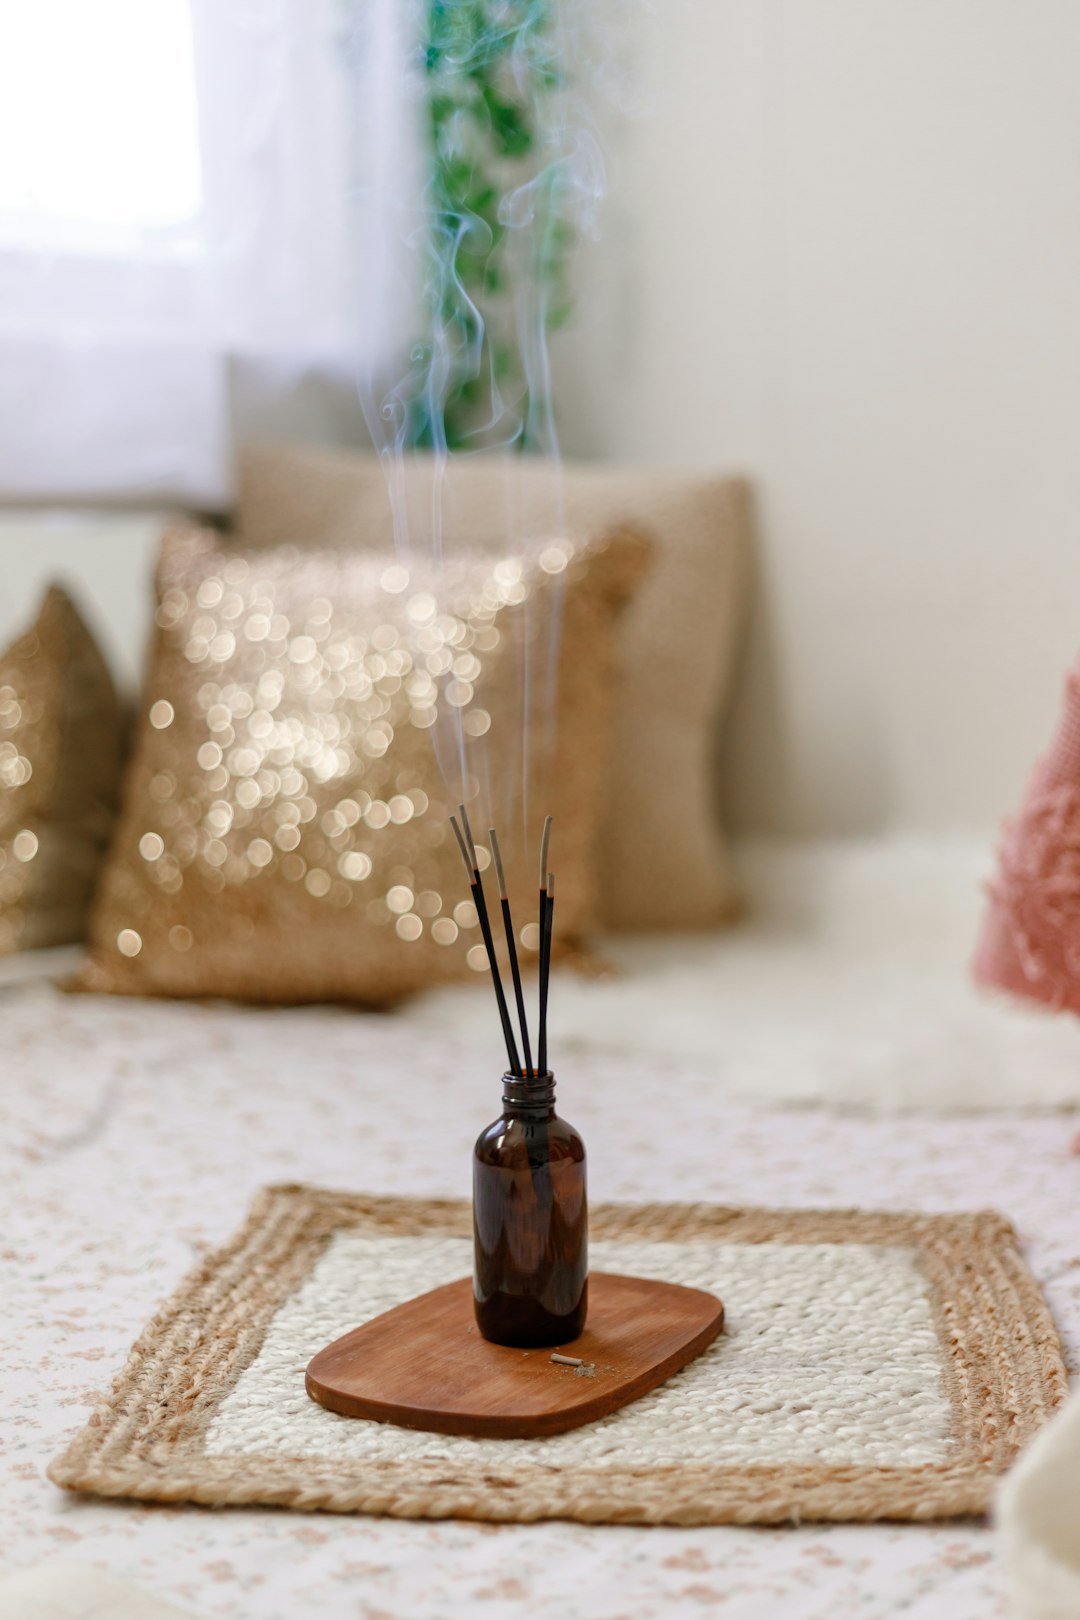 Different Types of Incense and Their Uses